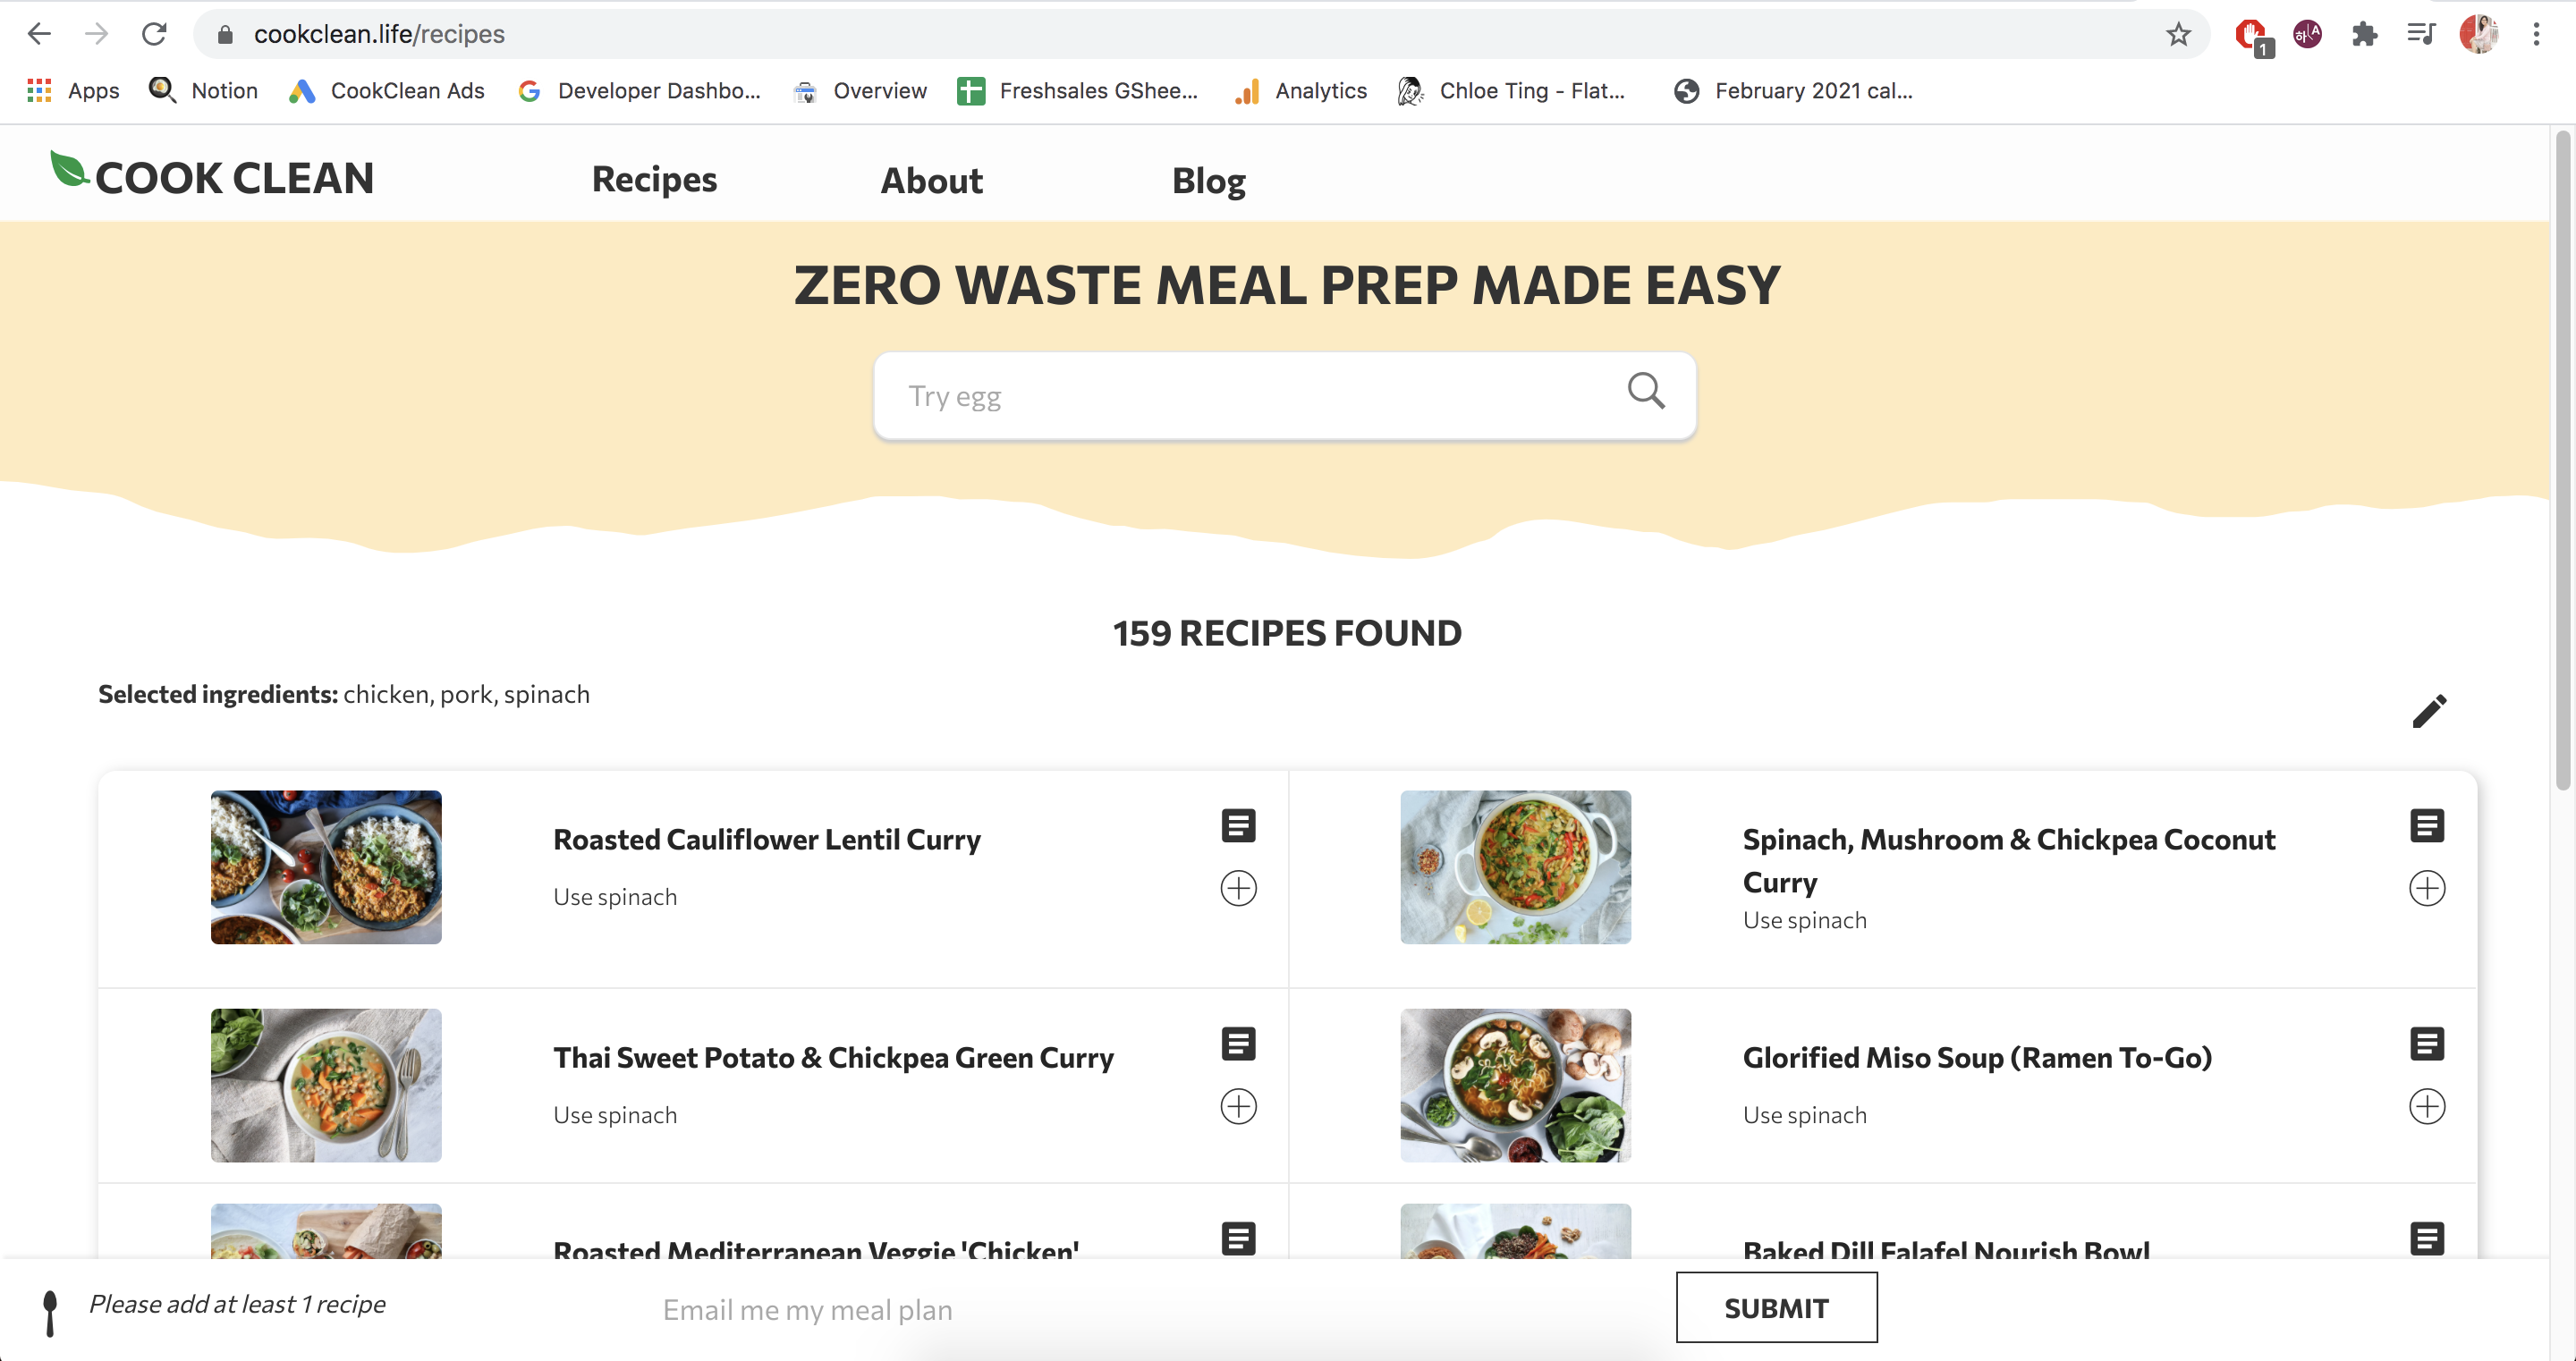 Recipes page: Select recipes for your meal prep